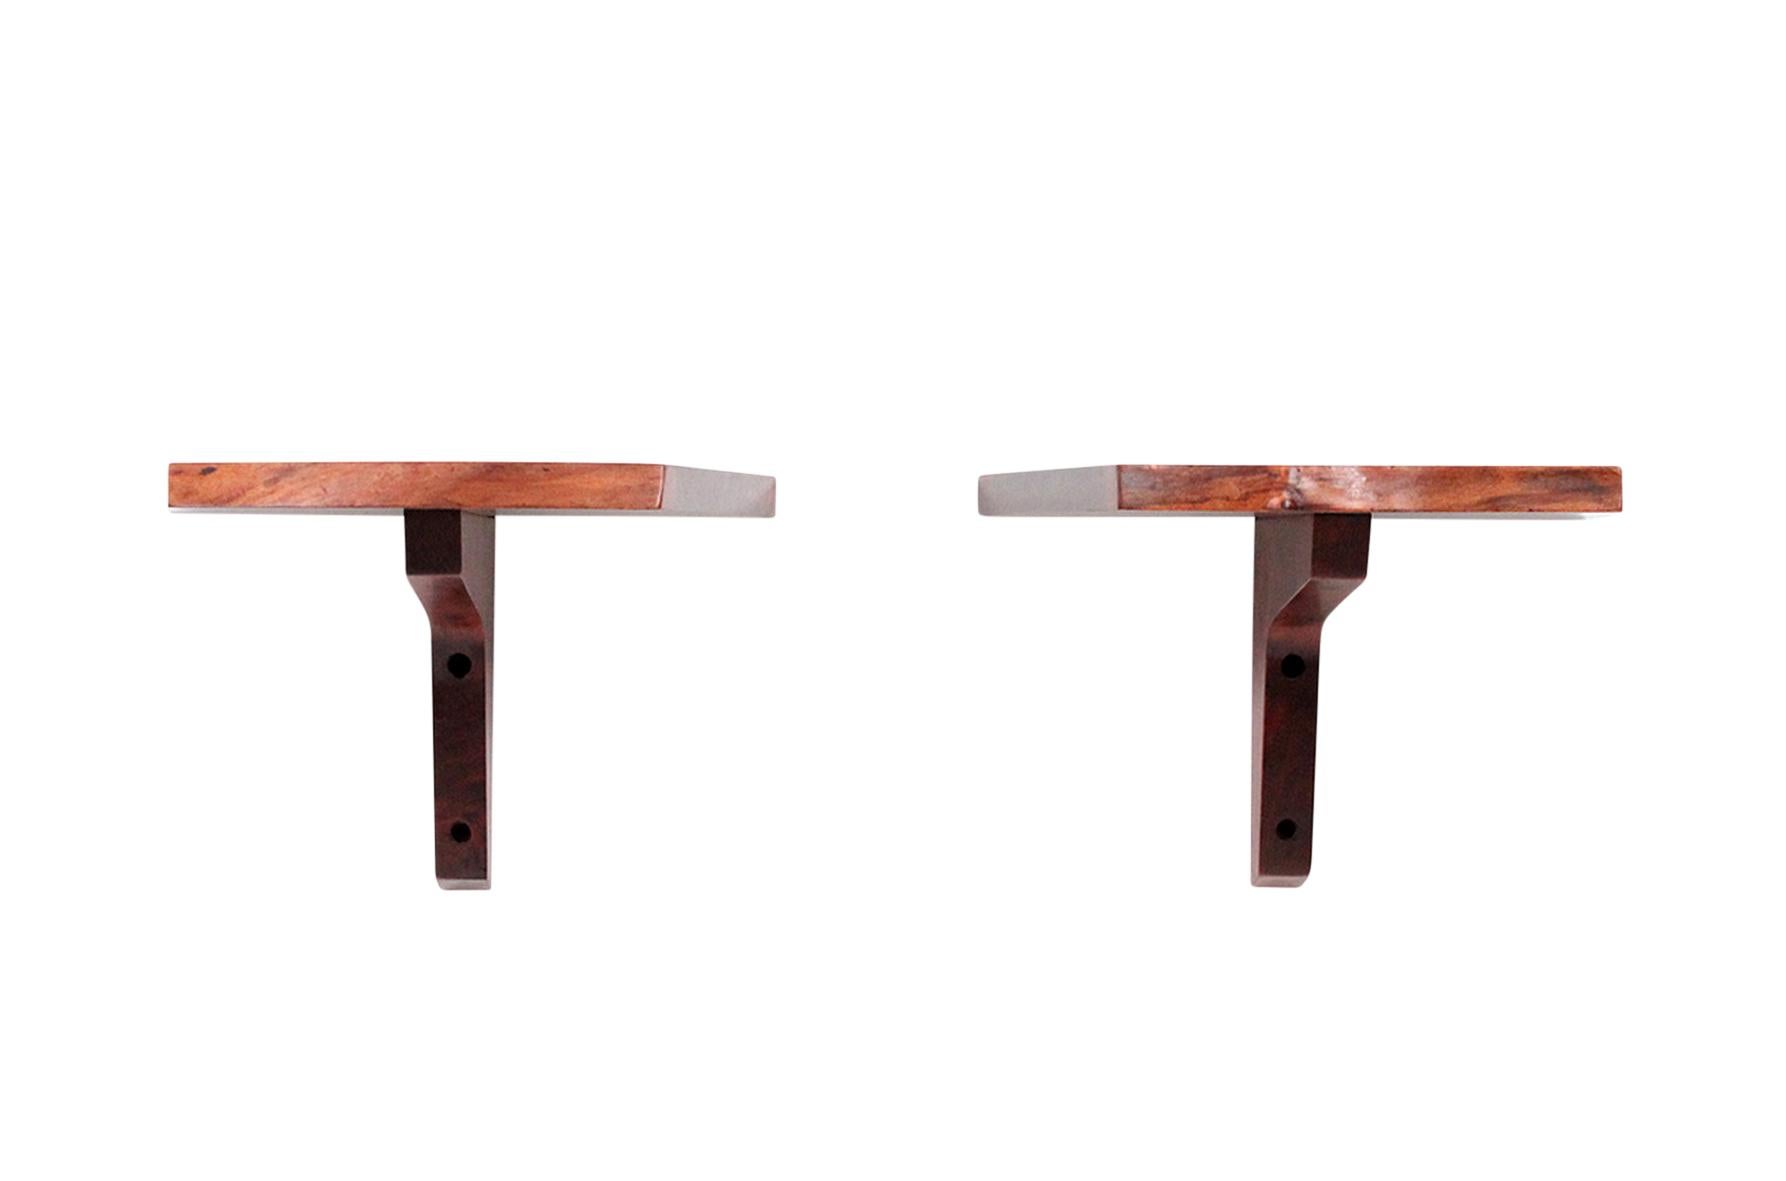 Pair of petite George Nakashima wall mounted shelves in walnut and with free-edges, circa 1975.